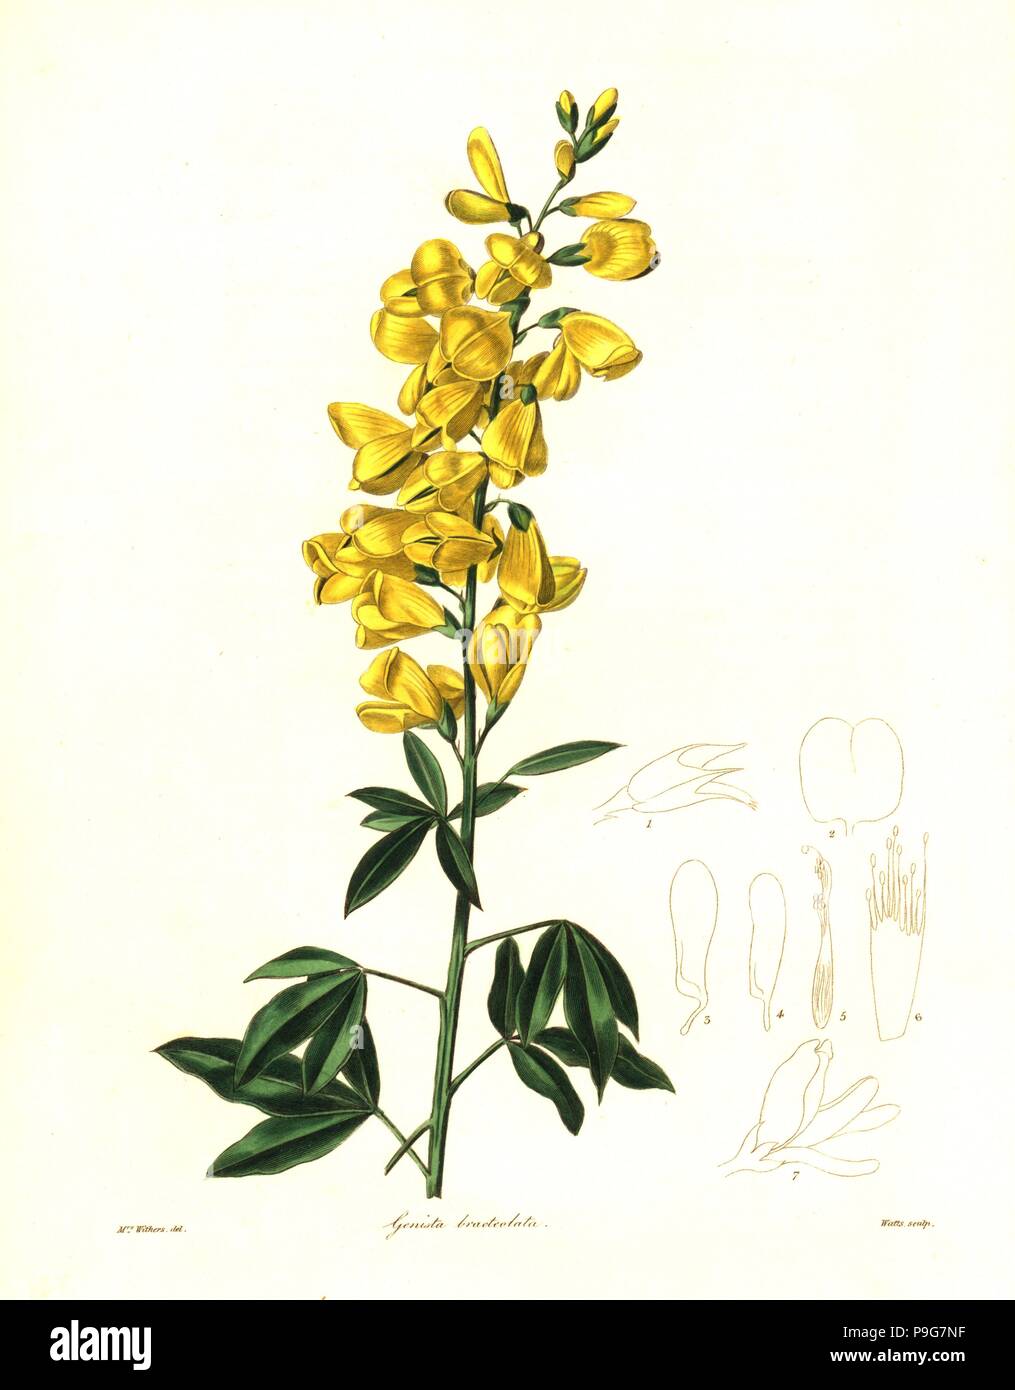 Racemose genista, Genista bracteolata. Handcoloured copperplate engraving by Watts after a botanical illustration by Mrs Augusta Withers from Benjamin Maund and the Rev. John Stevens Henslow's The Botanist, London, 1836. Stock Photo